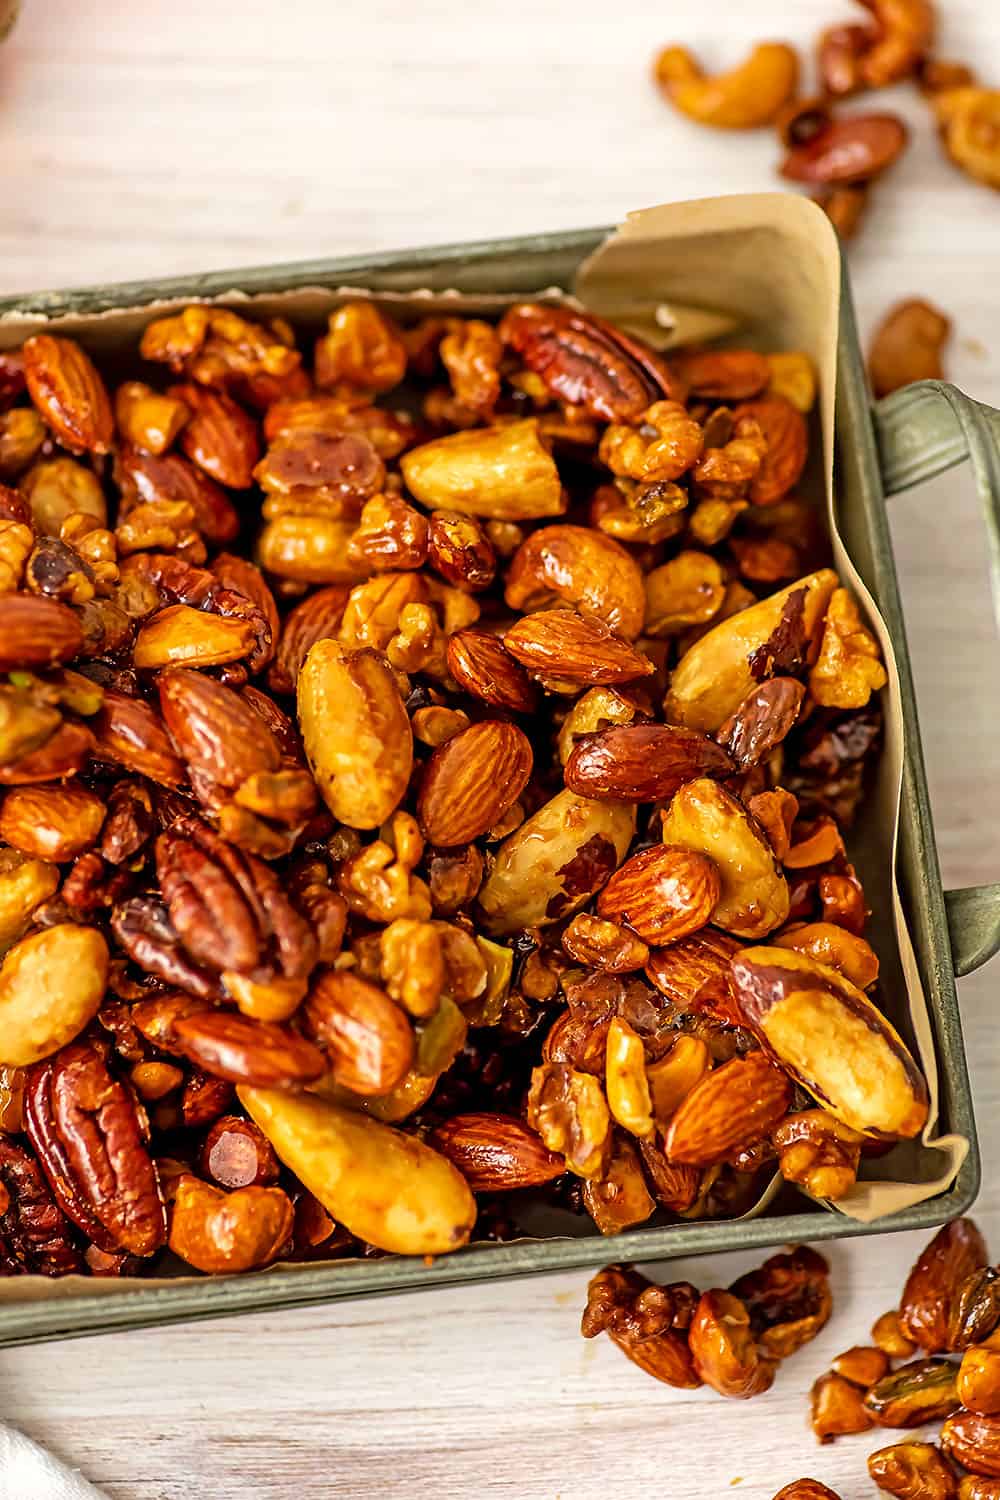 Roasted Mixed Nuts with Spiced Maple Glaze